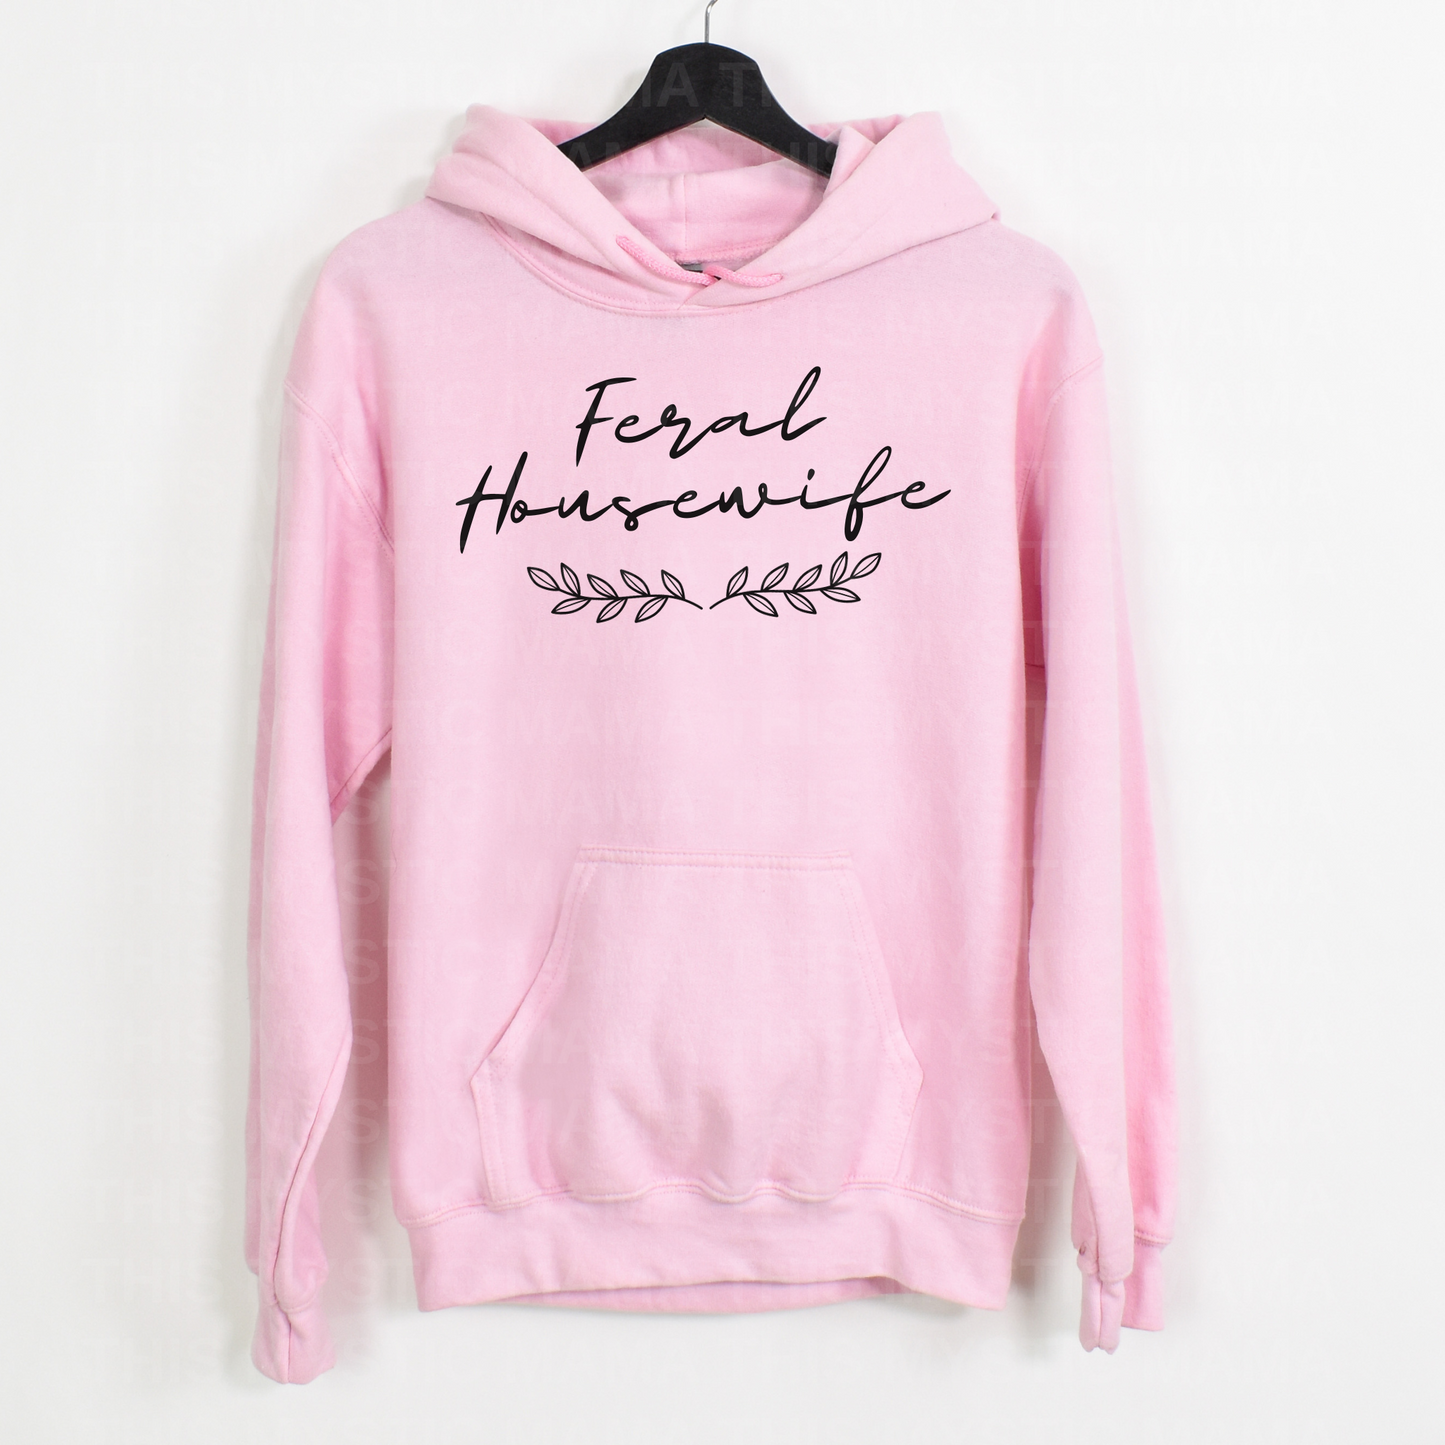 "Feral Housewife" Branches Hoodie